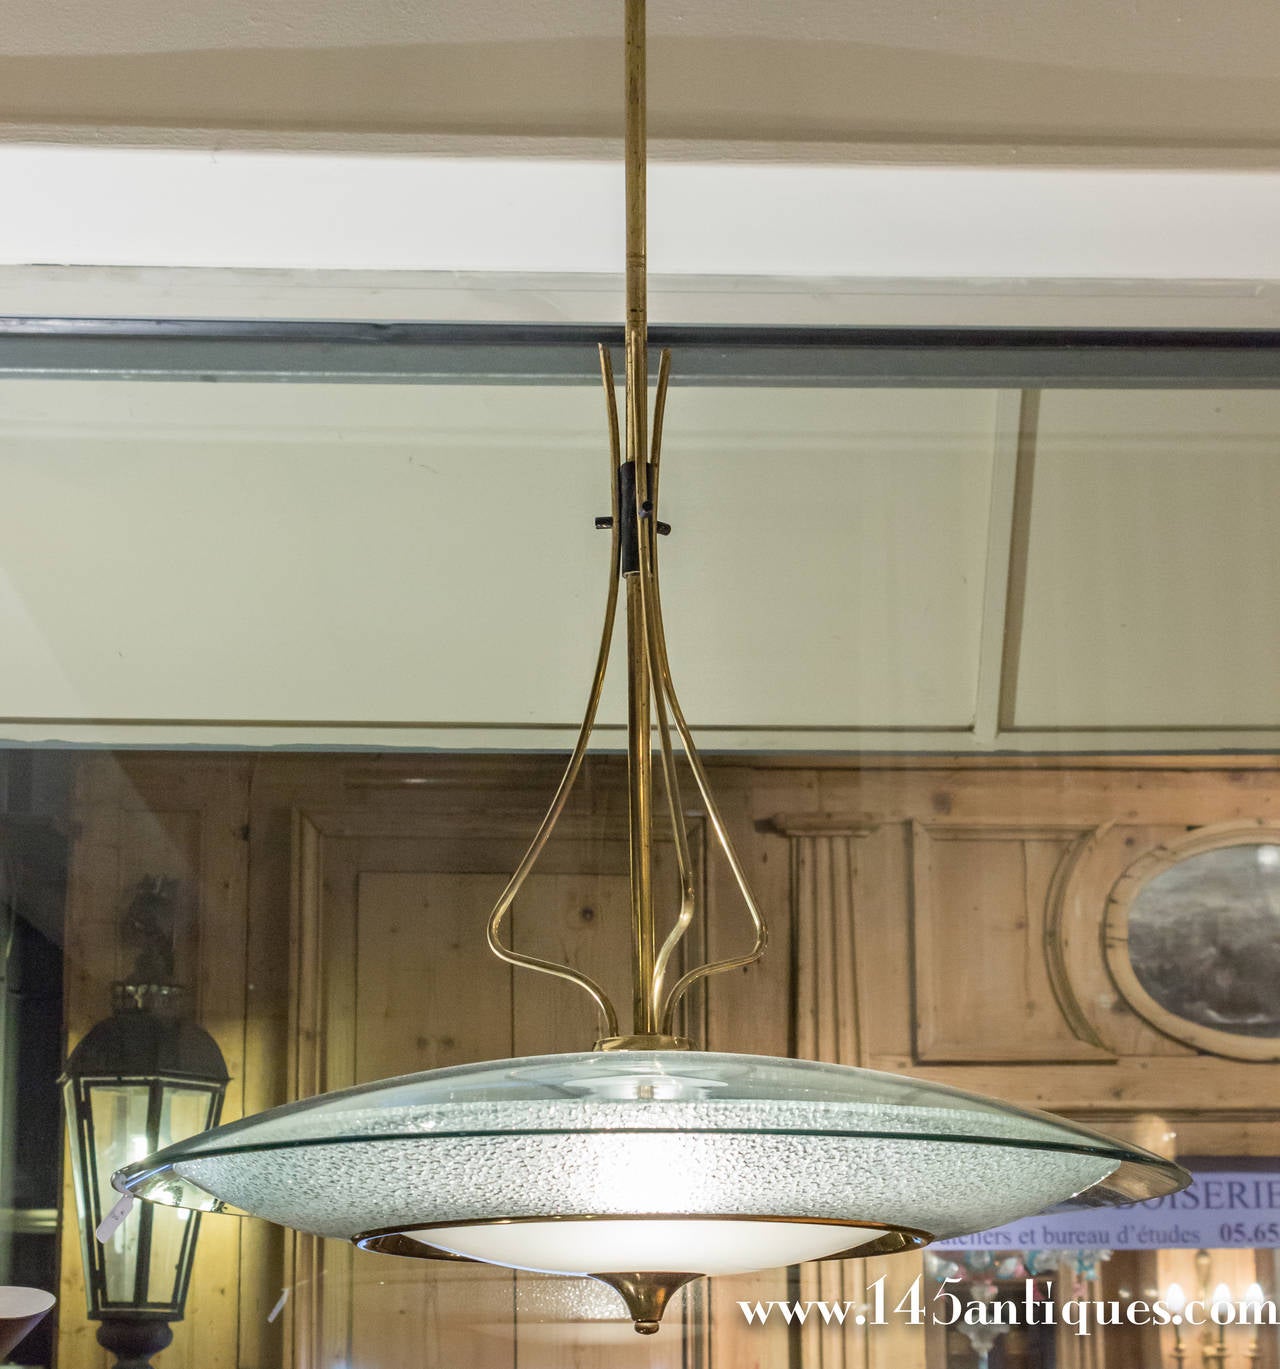 This exceptional chandelier is from Italy, circa 1960 and is most likely by Fontana Arte. The frosted and clear glass gives it a wonderful contrast to the brass fittings, circa 1960.

Item located in France, please allow 4 to 6 weeks delivery to